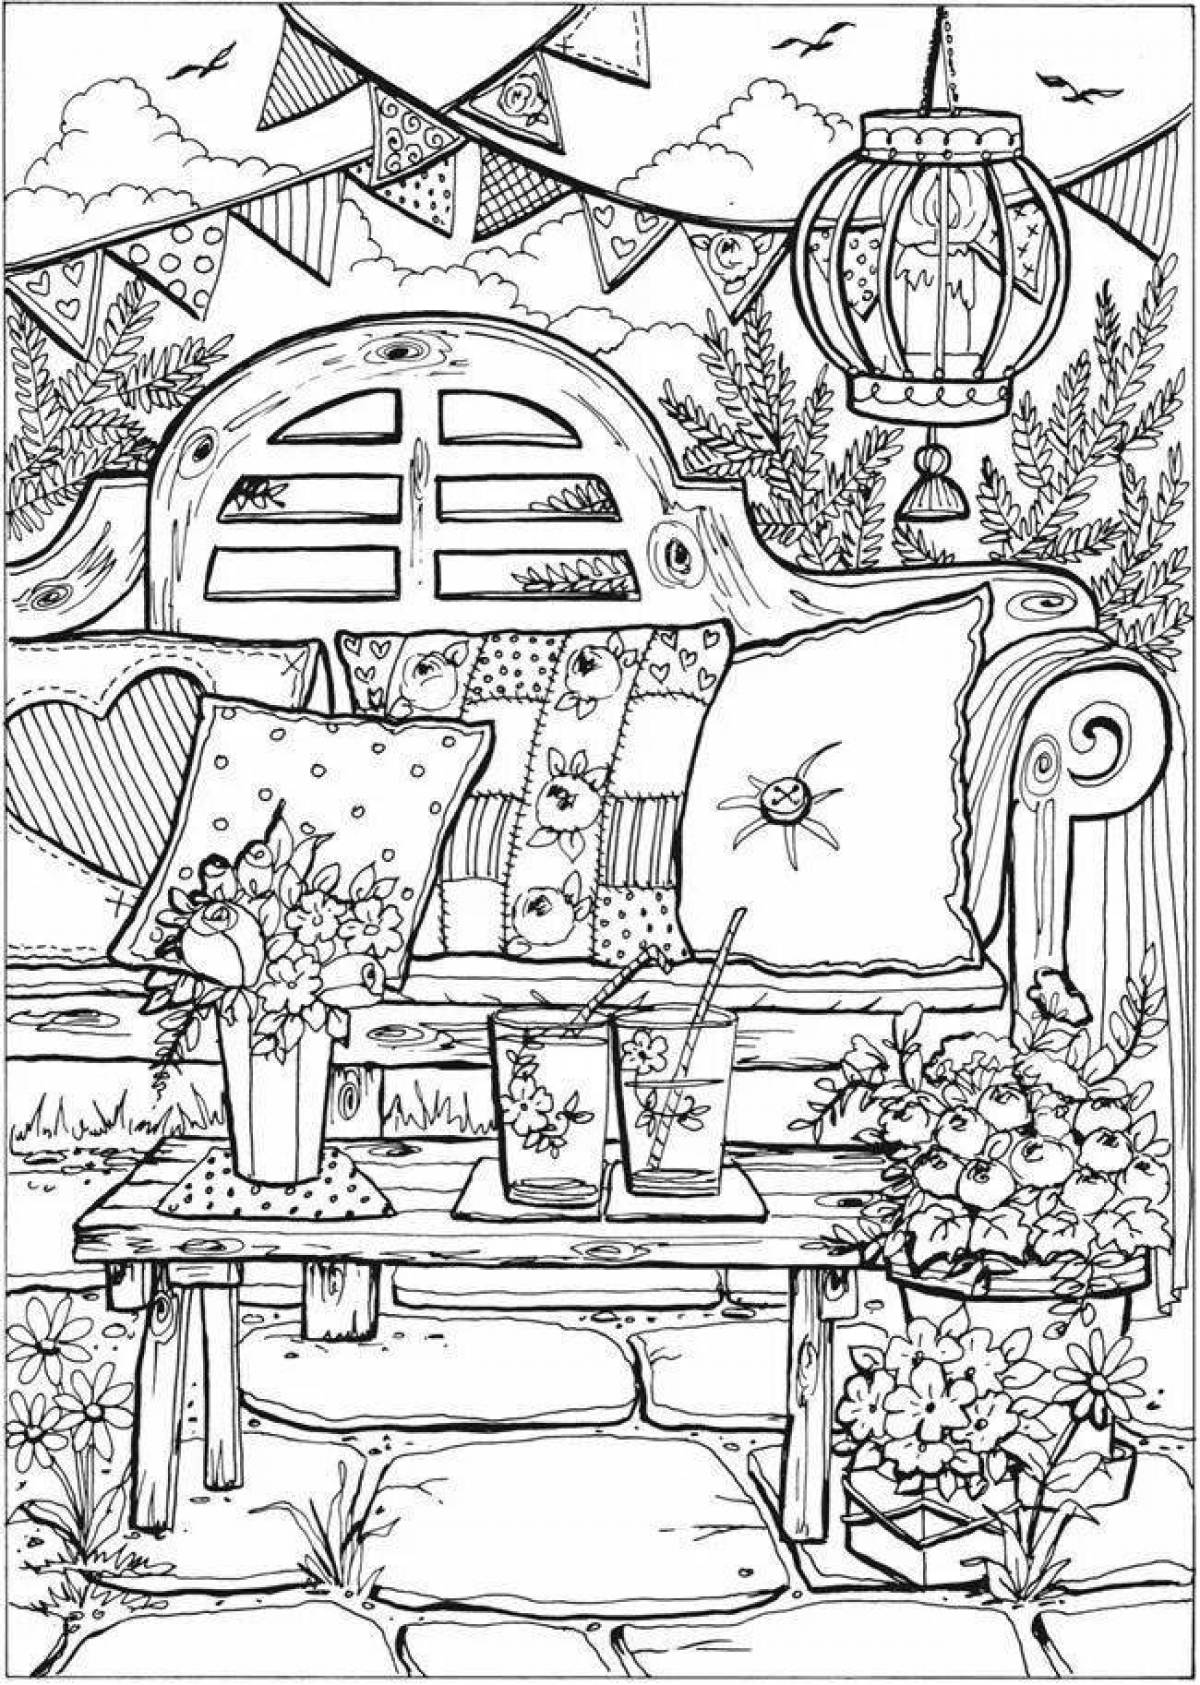 Creative haven - radiant coloring page